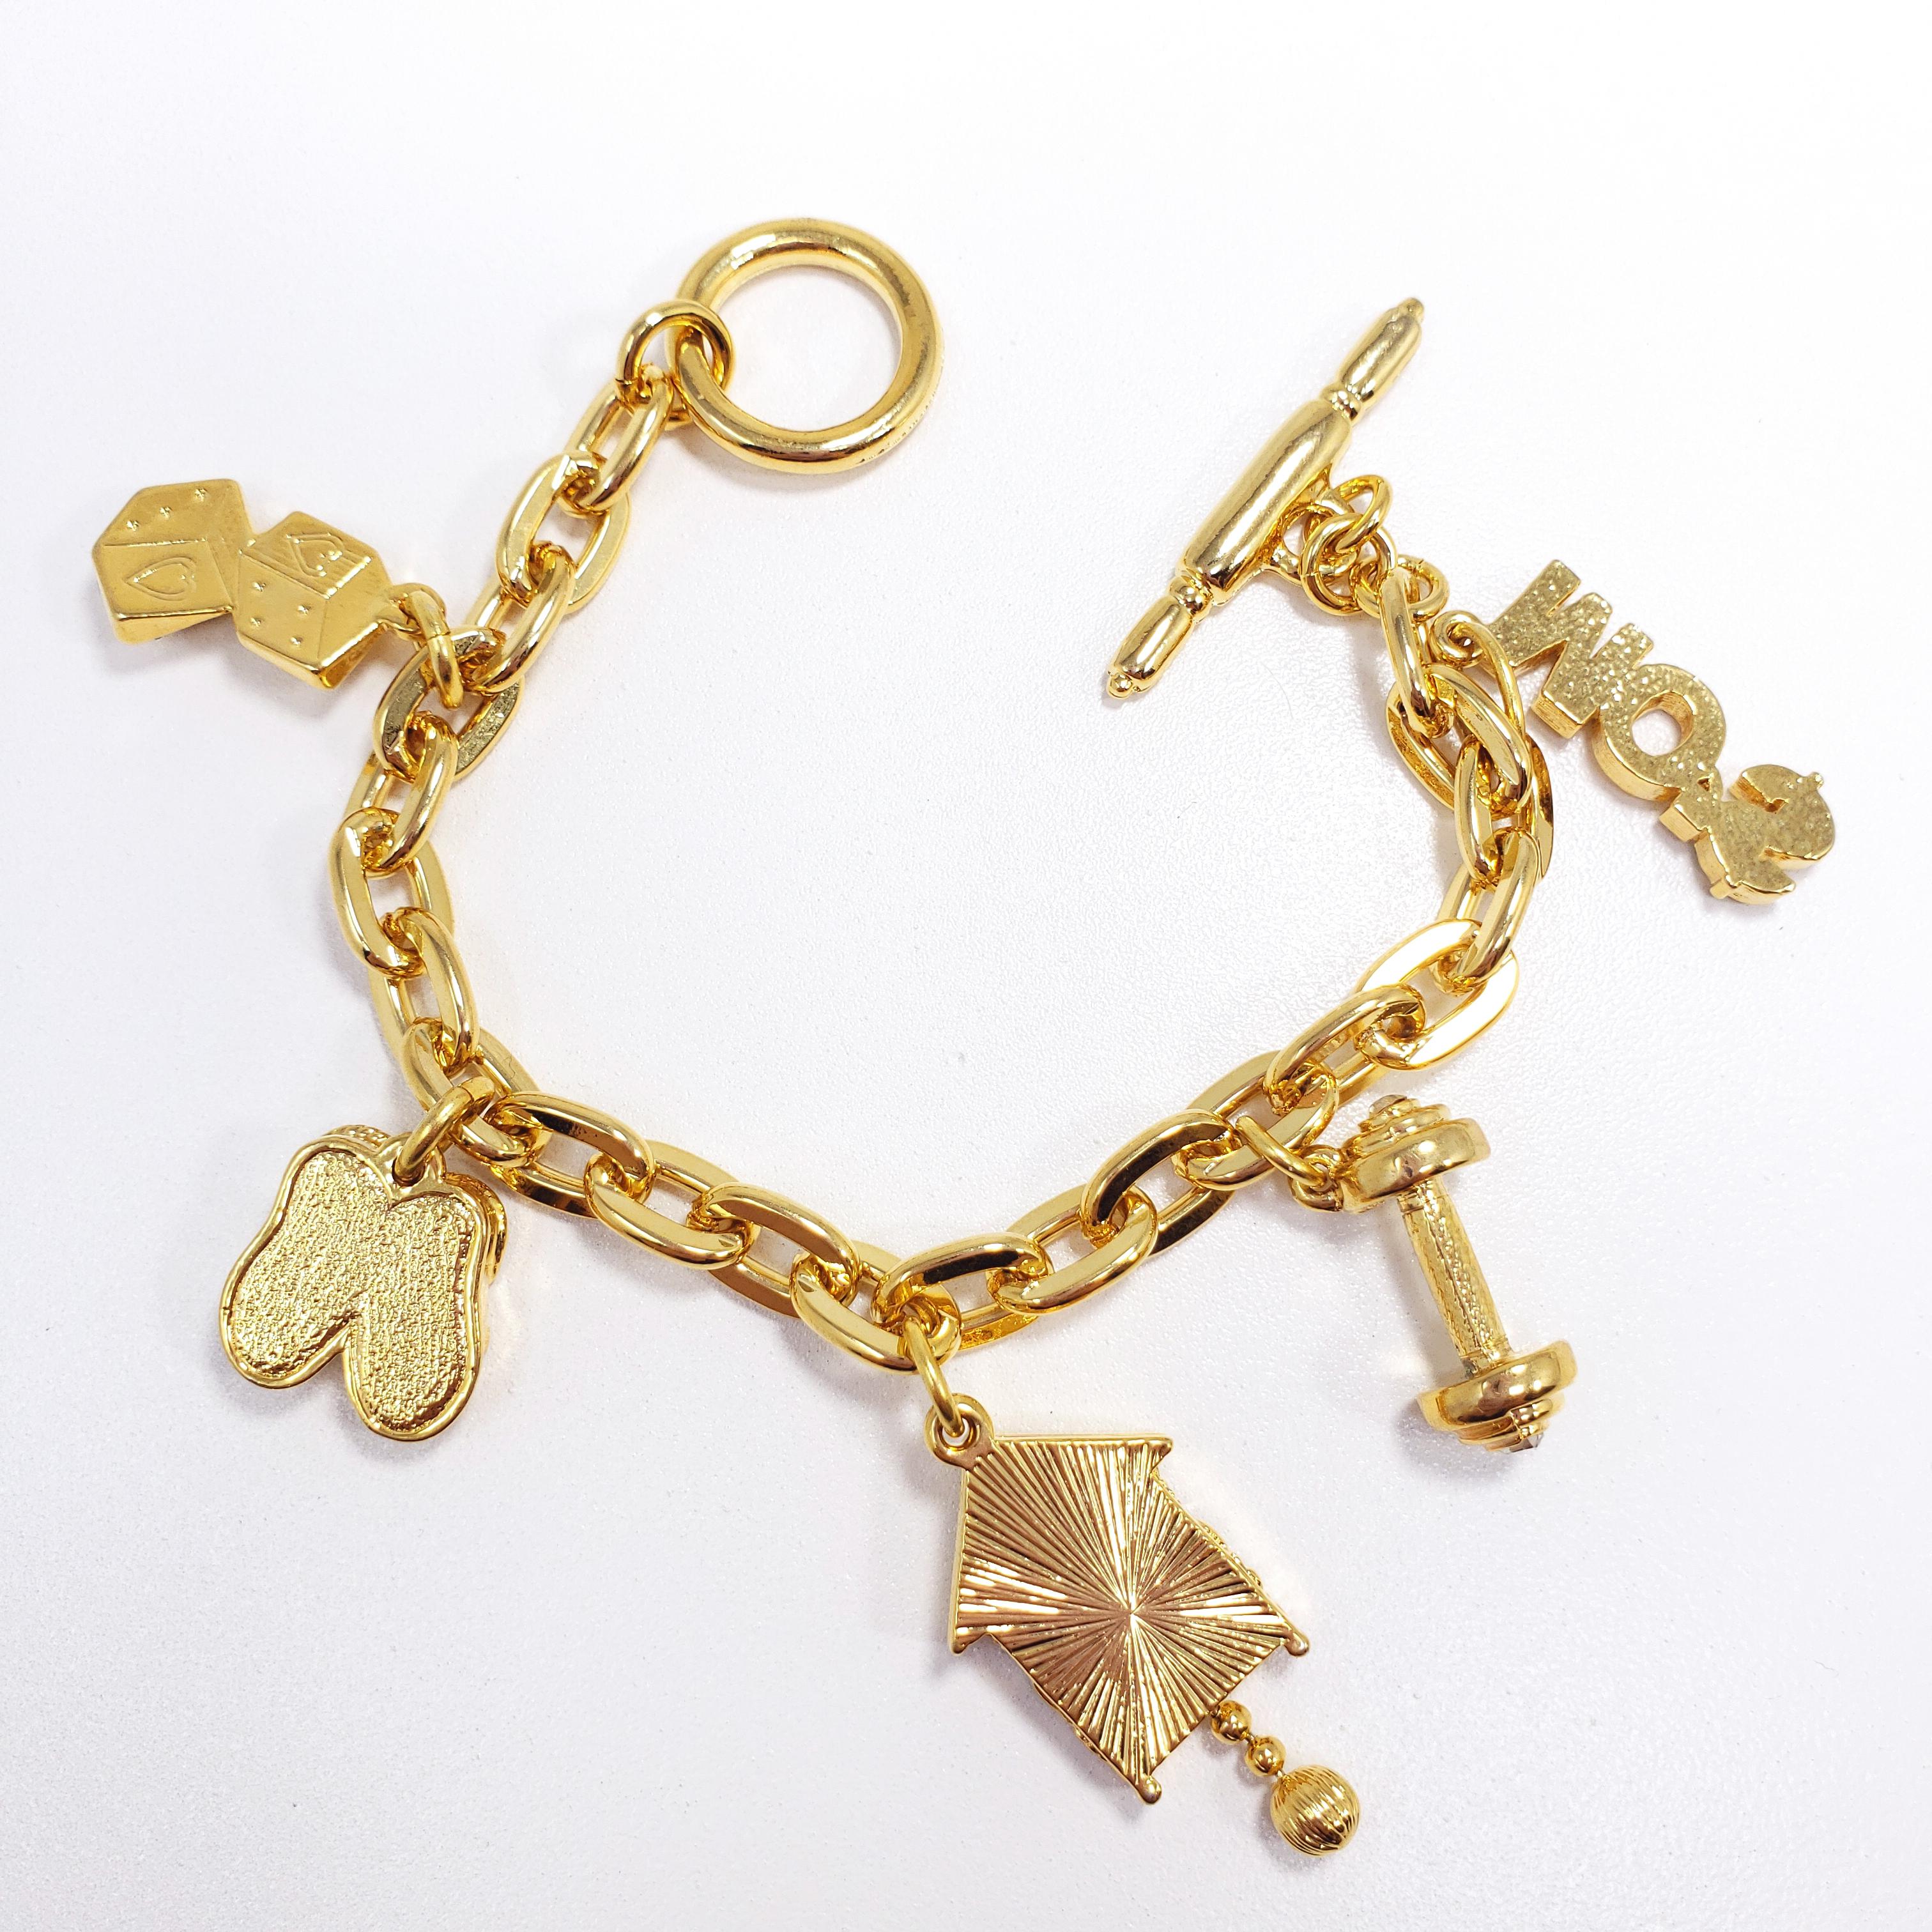 Round Cut KJL Kenneth Jay Lane Chain Link Five Charm Bracelet, with Toggle Clasp, in Gold For Sale